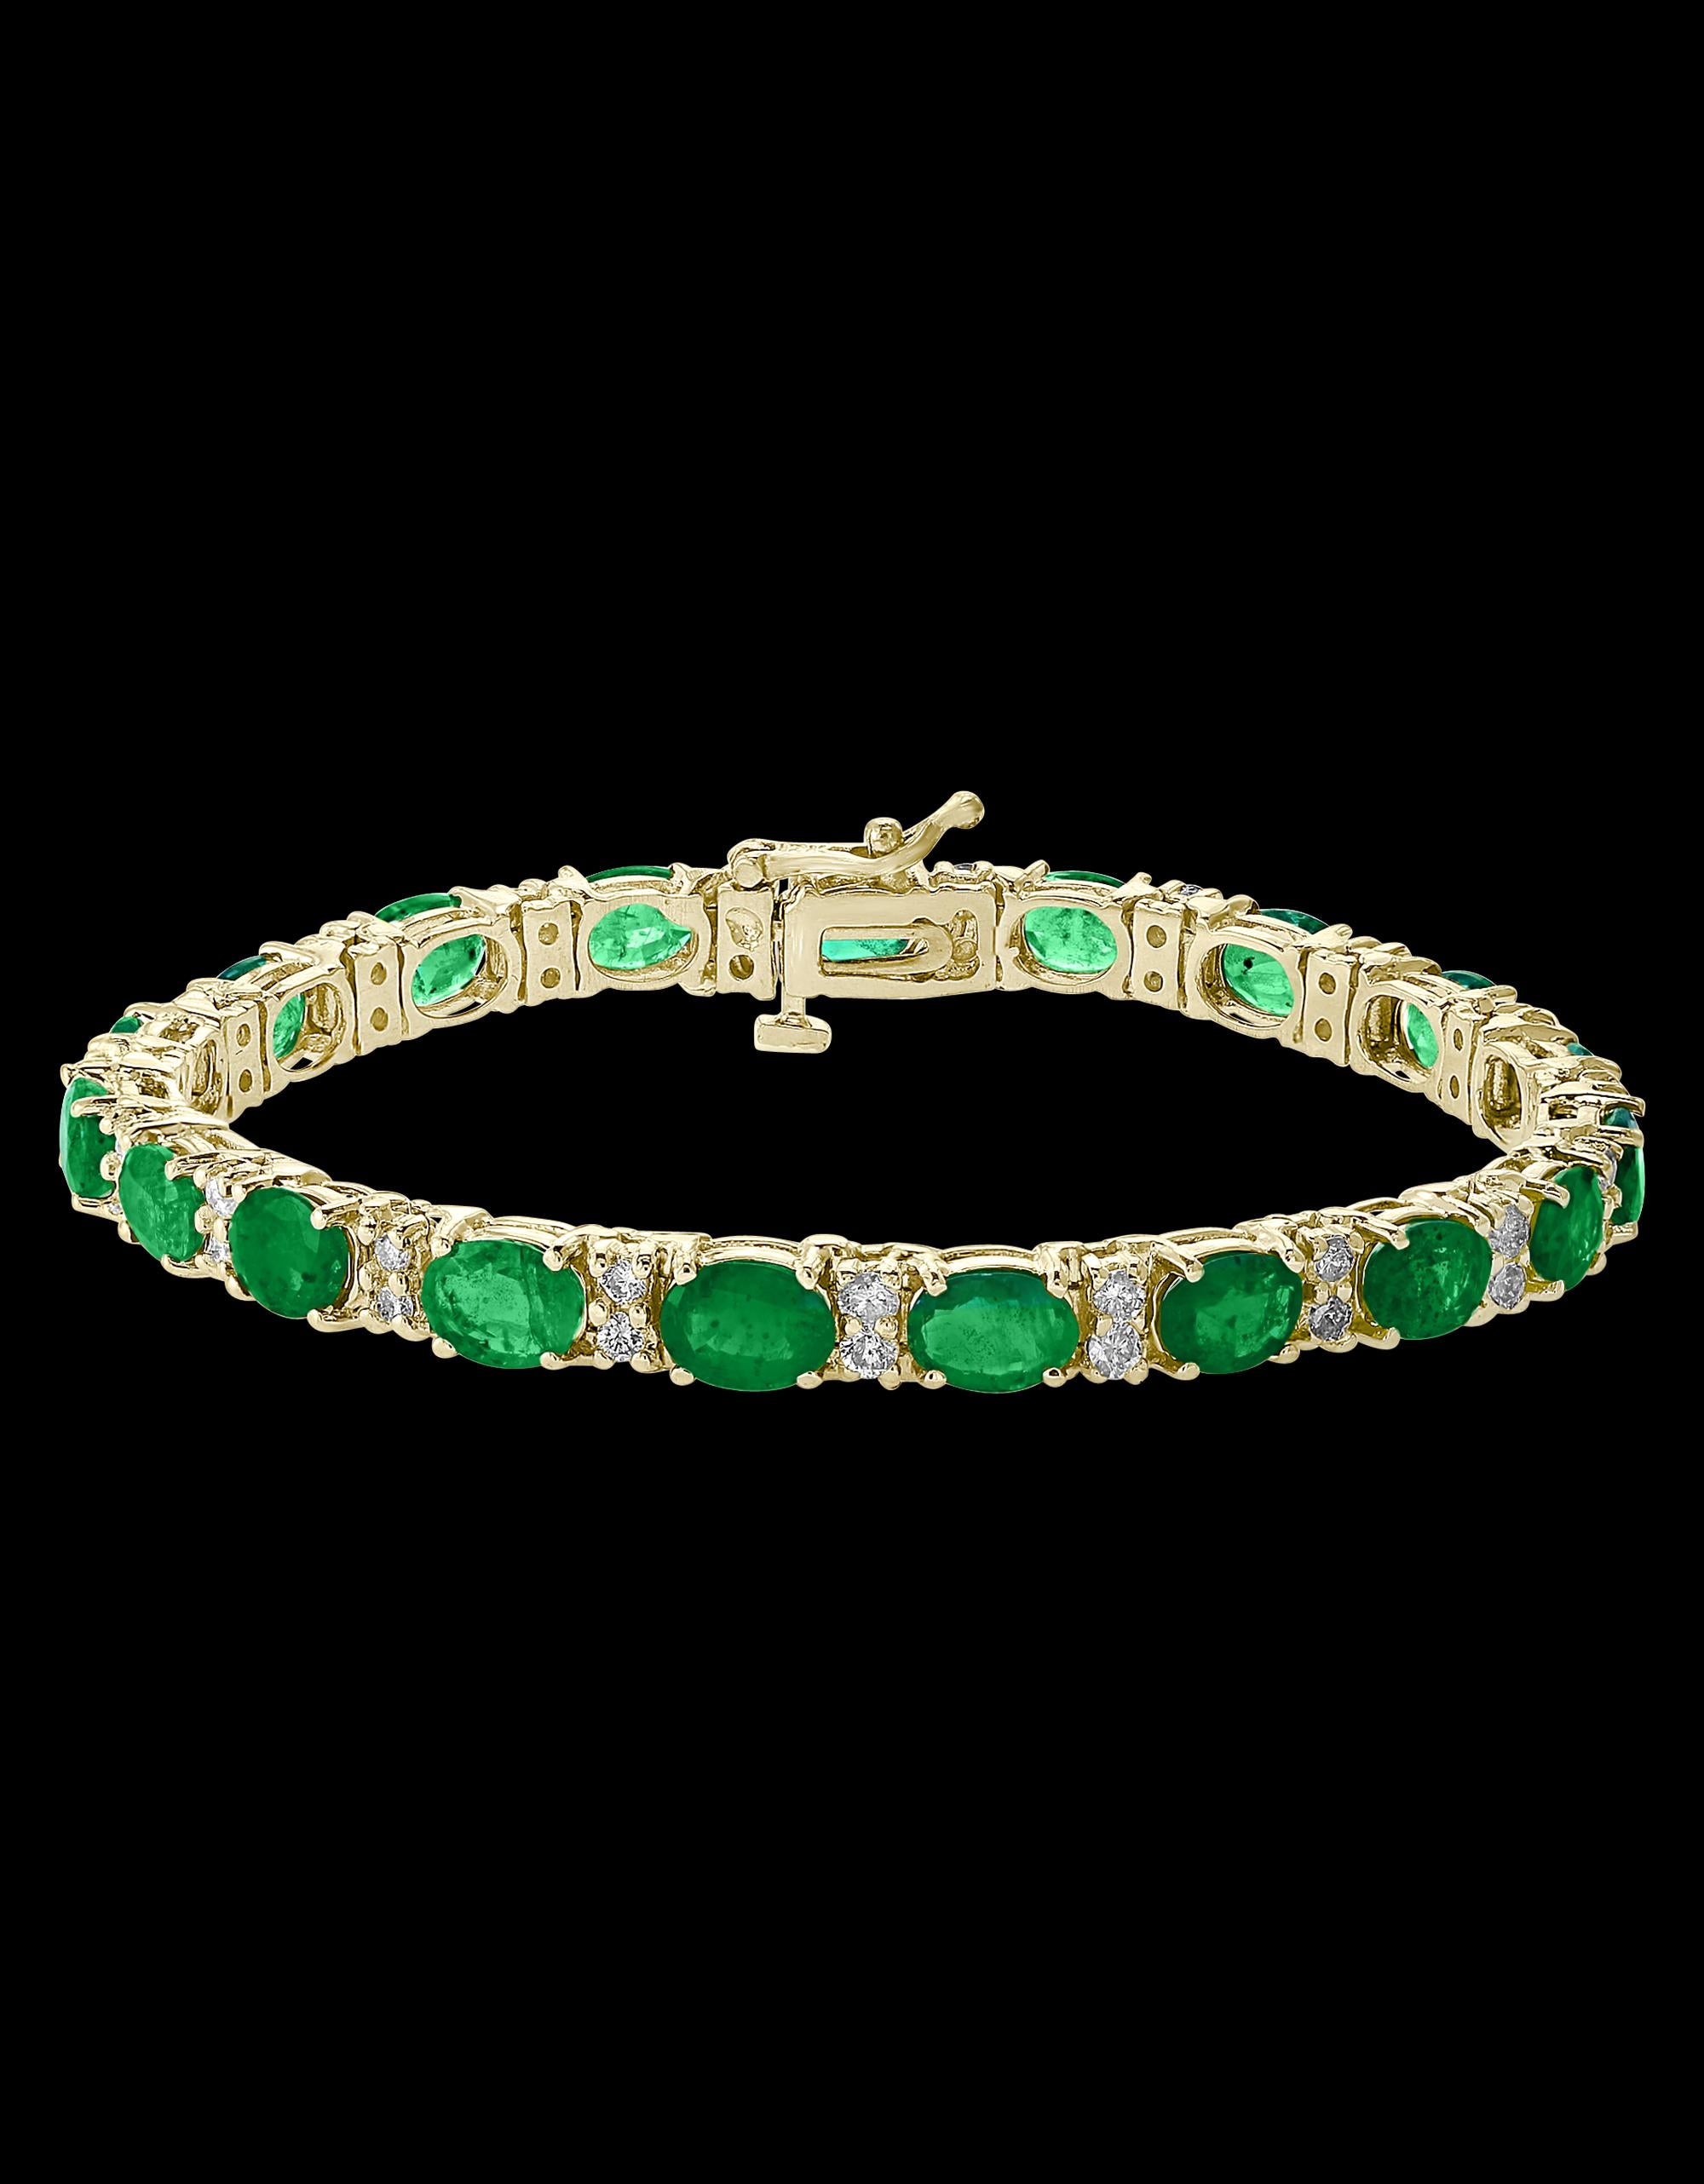  This exceptionally affordable Tennis  bracelet has  19 stones of oval  Emeralds  . Each Emerald is spaced by two diamonds . Total weight of the Emeralds is  approximately 15 carat. Total number of diamonds are 40 and diamond weighs is over 1